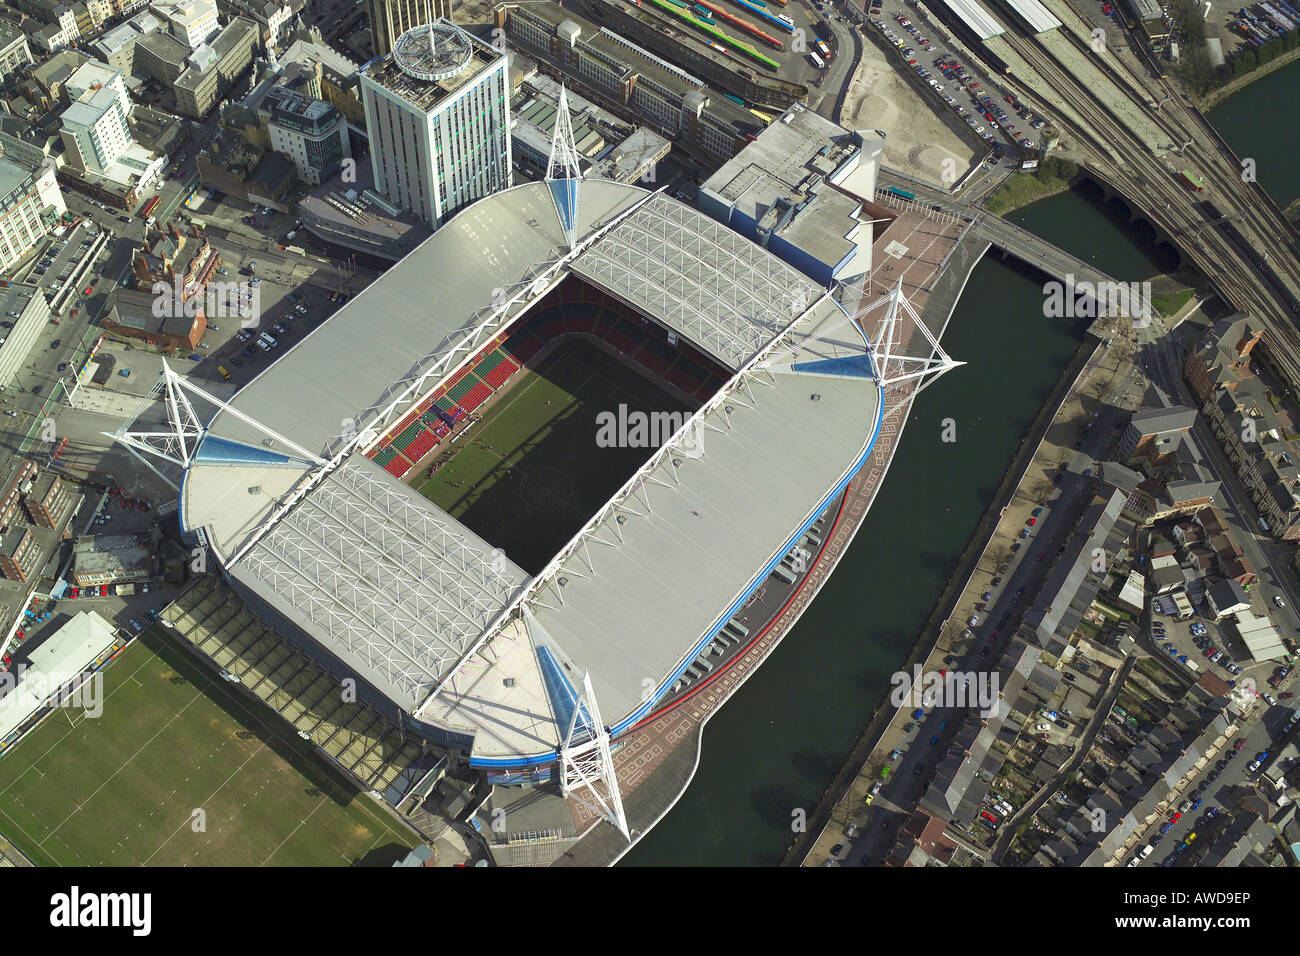 Aerial view of the Millennium Stadium in Cardiff, Wales, home of Welsh Rugby Union and the venue for concerts & sporting events Stock Photo